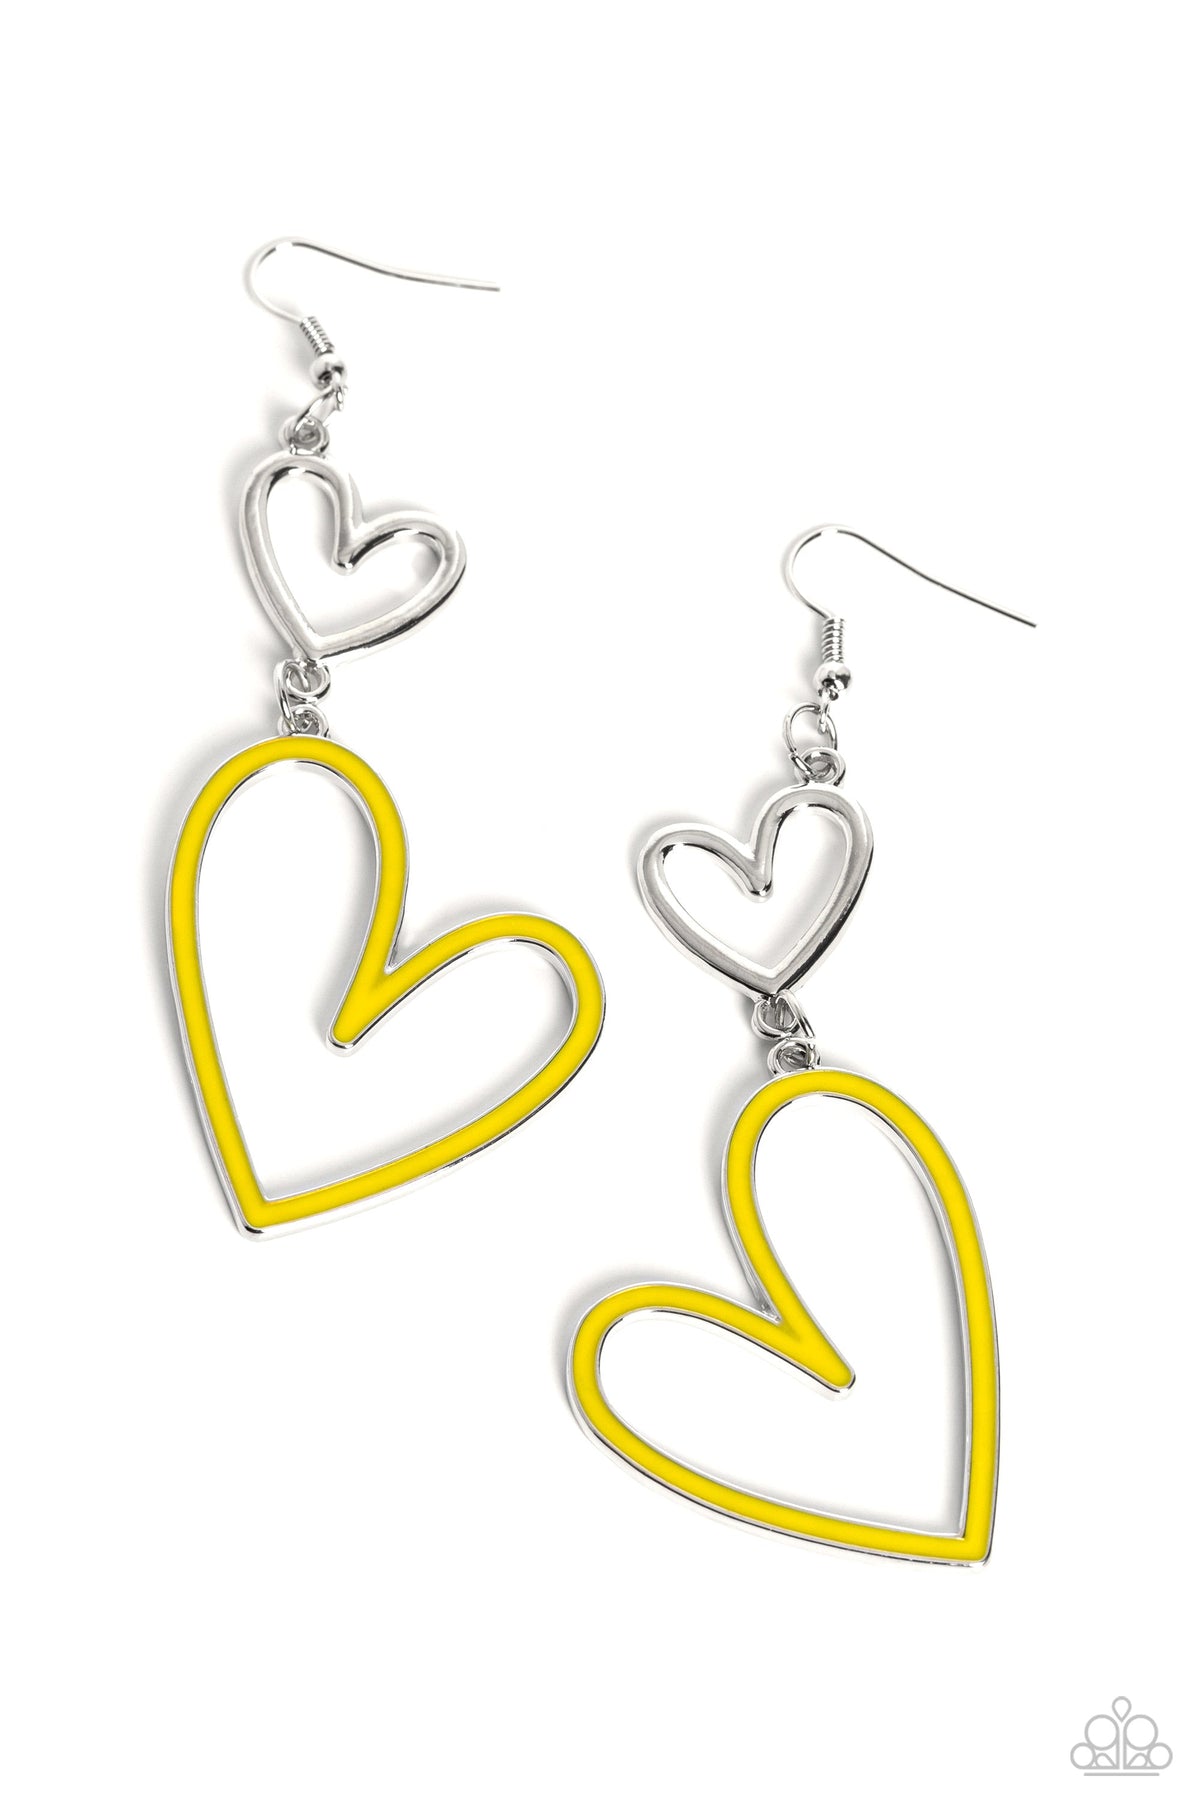 Pristine Pizzazz Yellow Heart Earrings- lightbox - CarasShop.com - $5 Jewelry by Cara Jewels